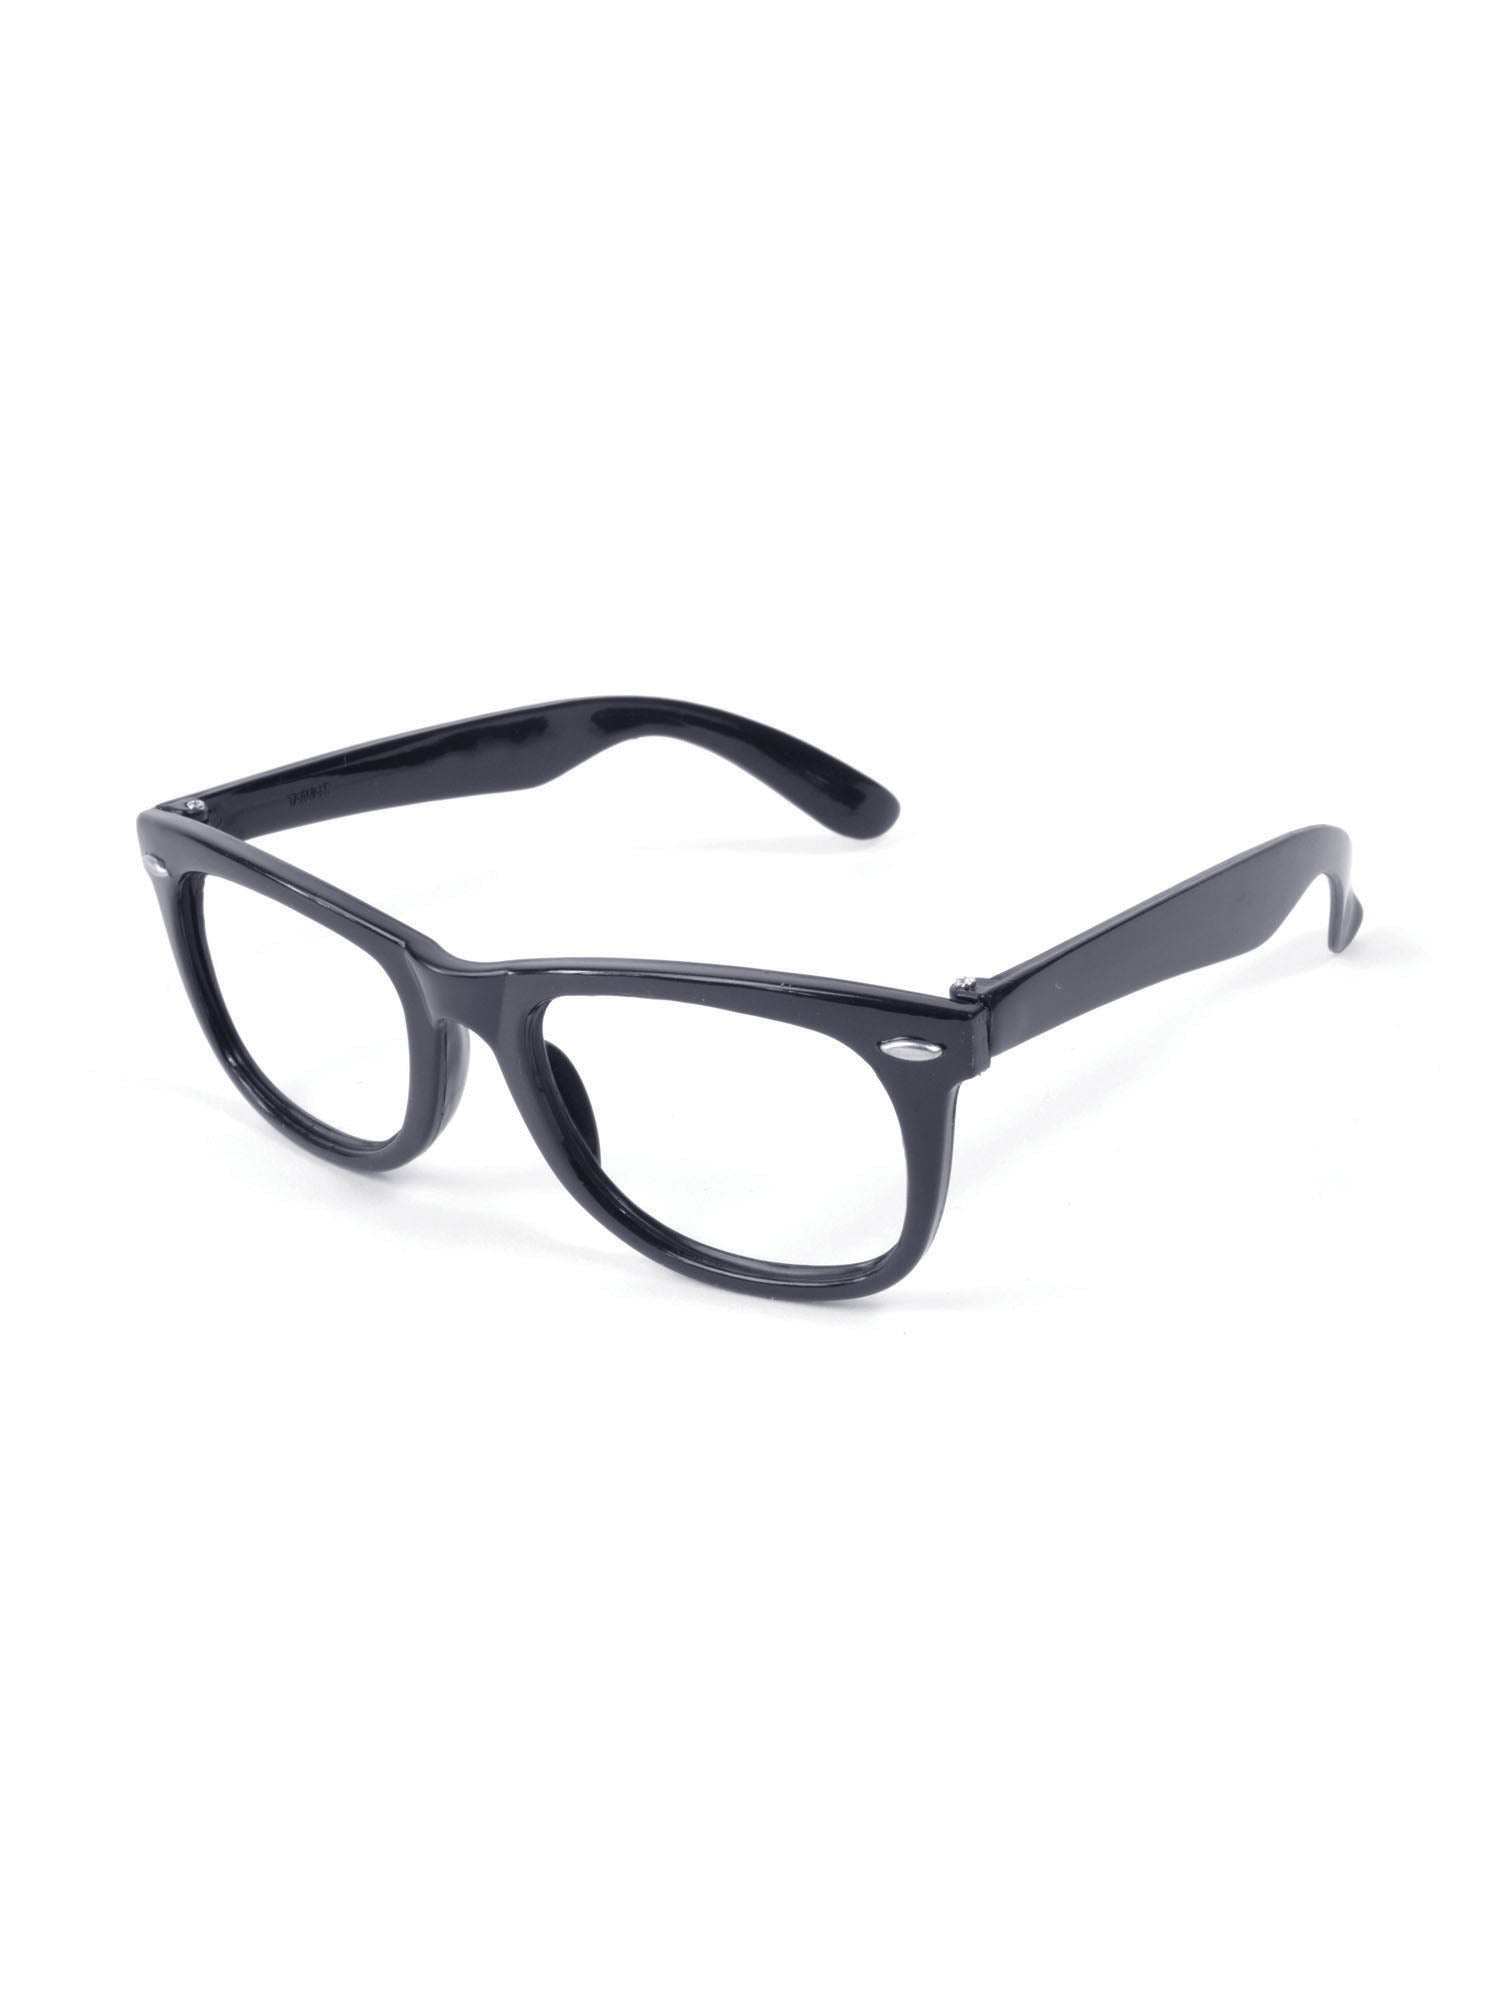 Glasses, Black, Generic, Accessories, One Size, Back